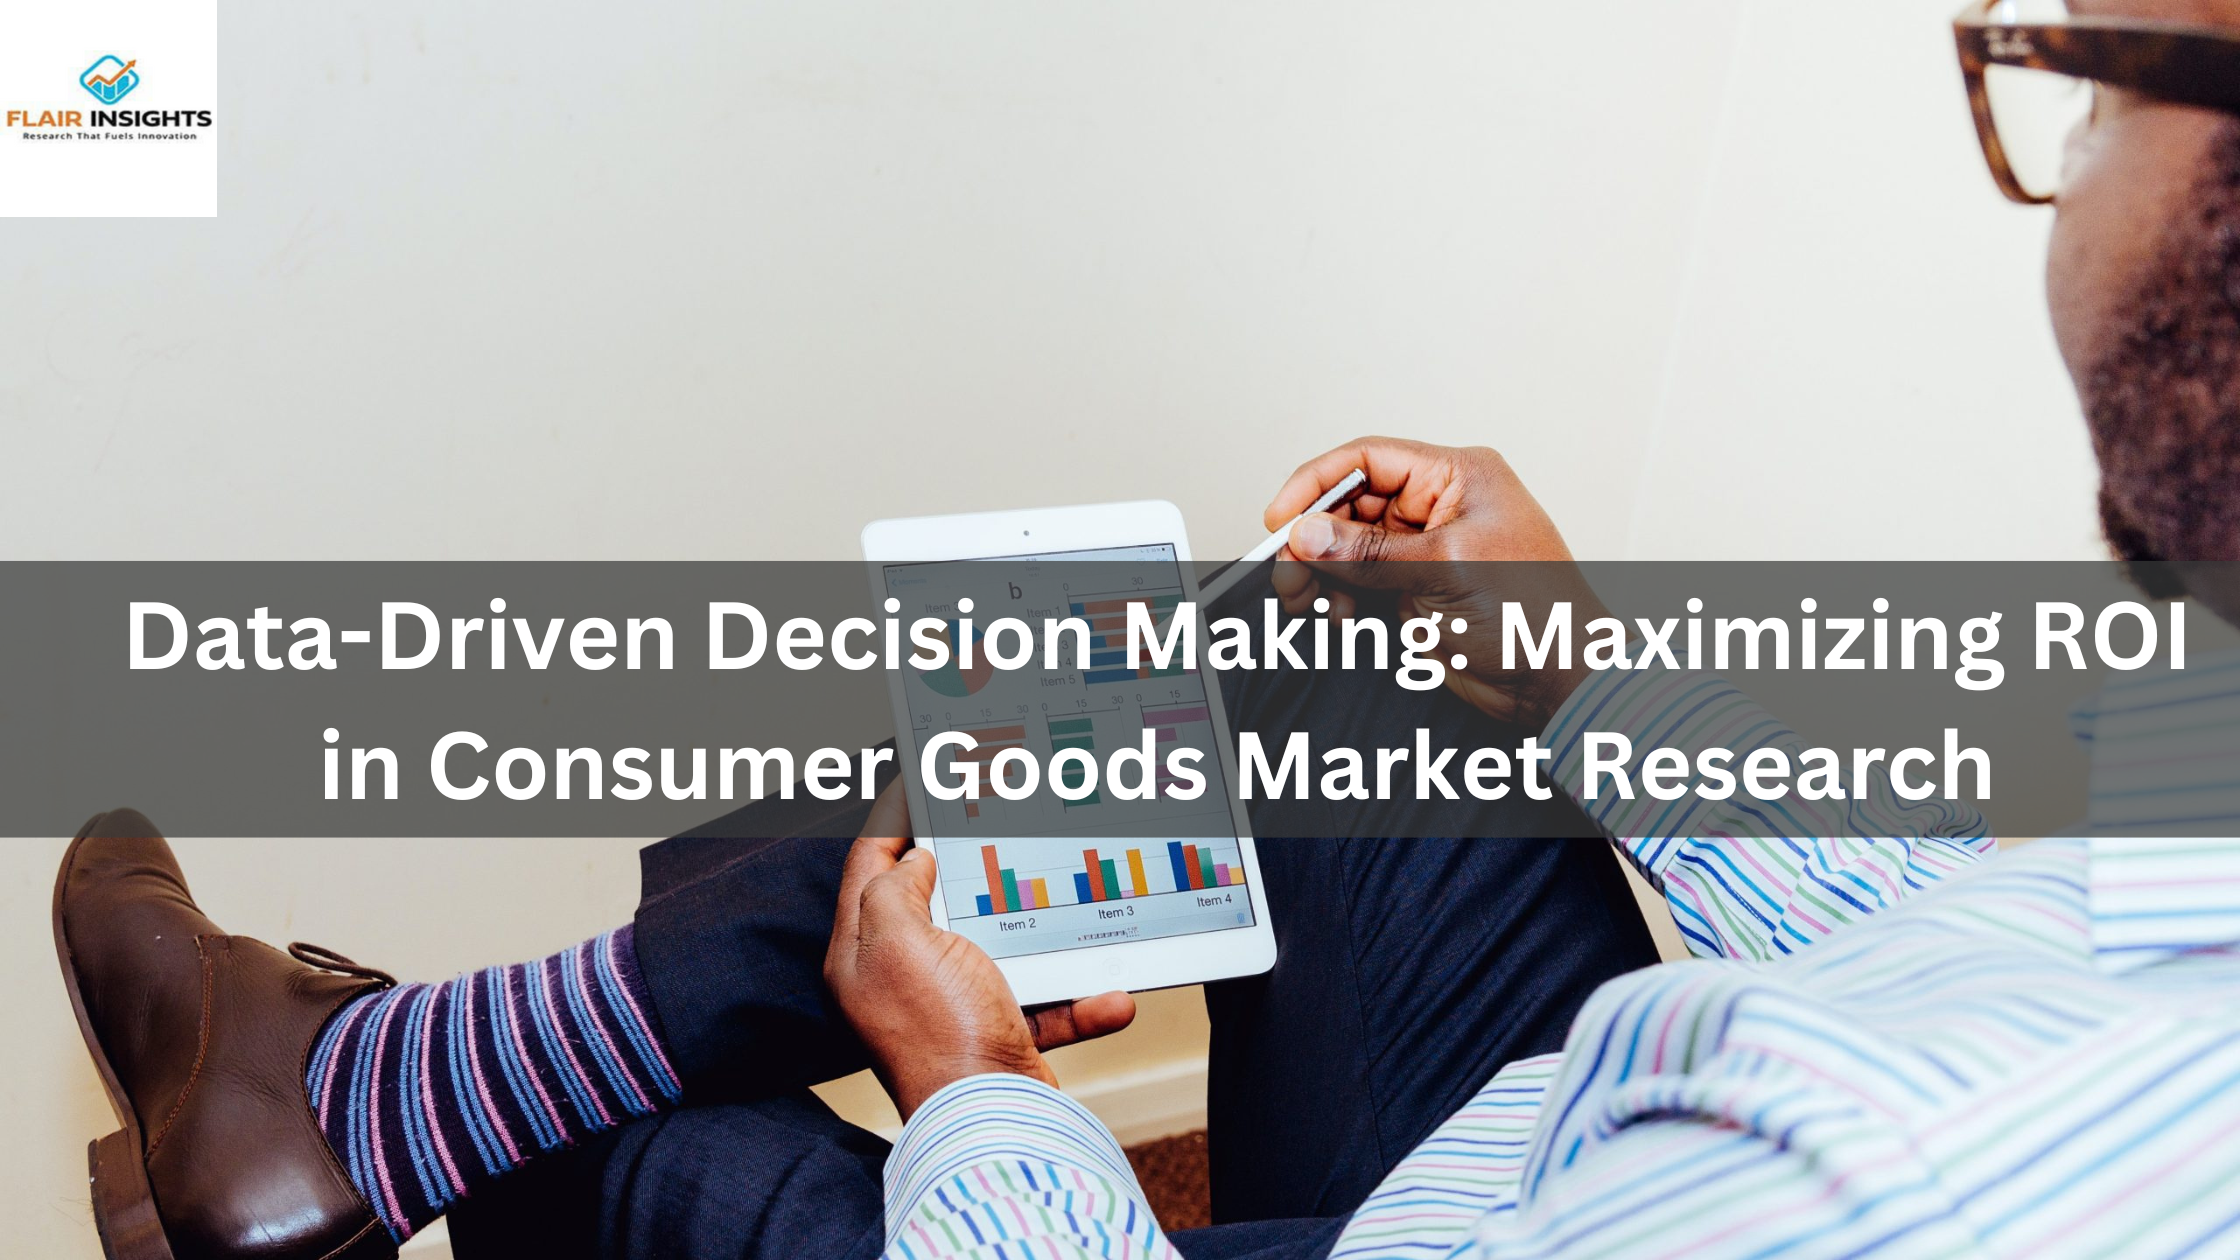 Data-Driven Decision Making: Maximizing ROI in Consumer Goods Market Research